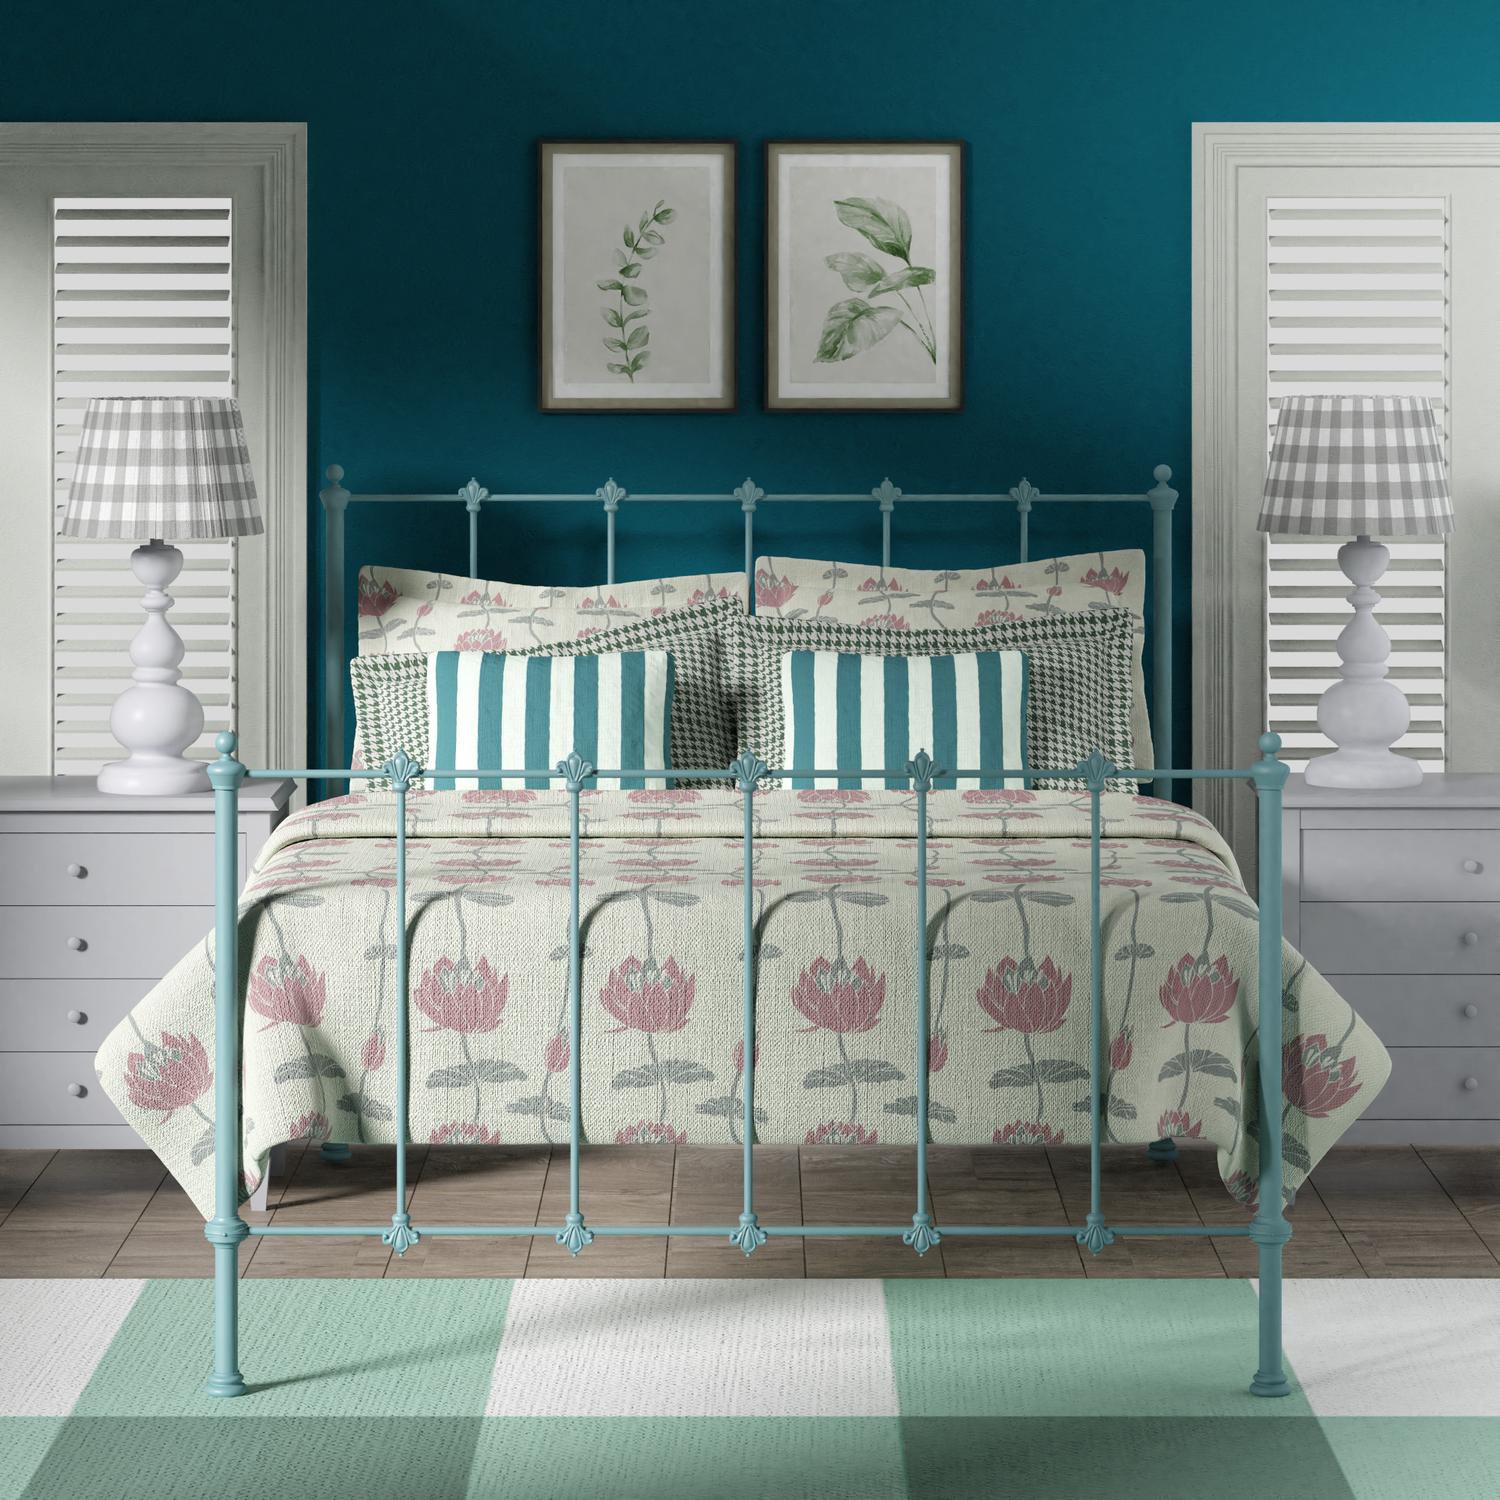 Paris iron bed - Teal and grey bedroom